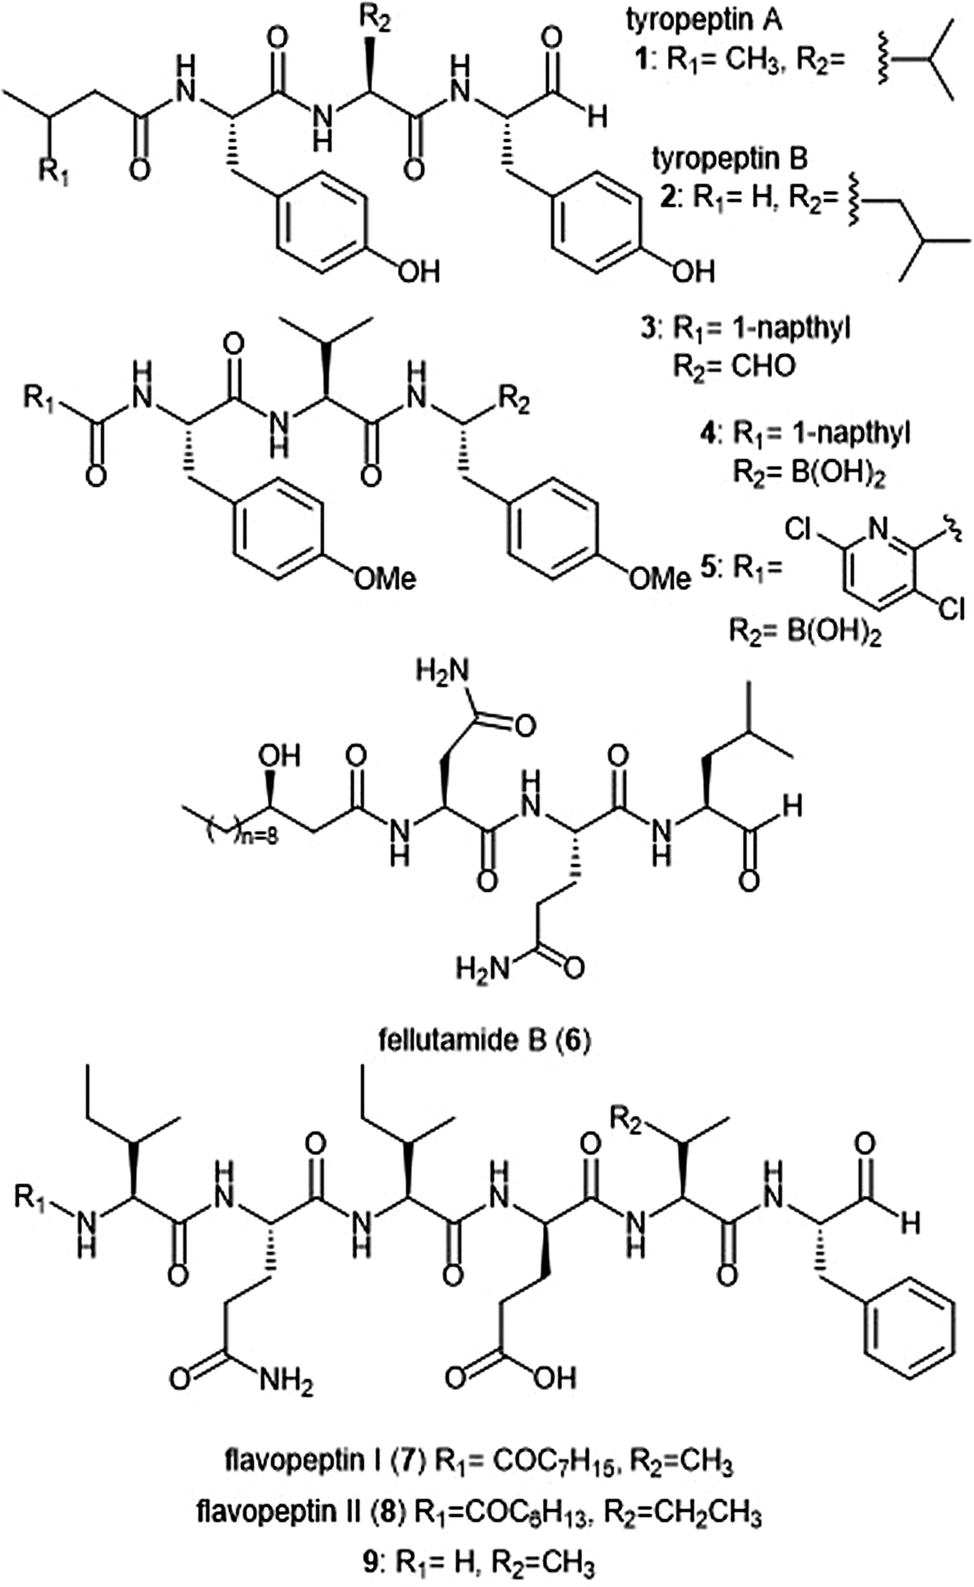 Natural Product Scaffolds As Inspiration For The Design And Synthesis Of s Human Proteasome Inhibitors Rsc Chemical Biology Rsc Publishing Doi 10 1039 D0cbb